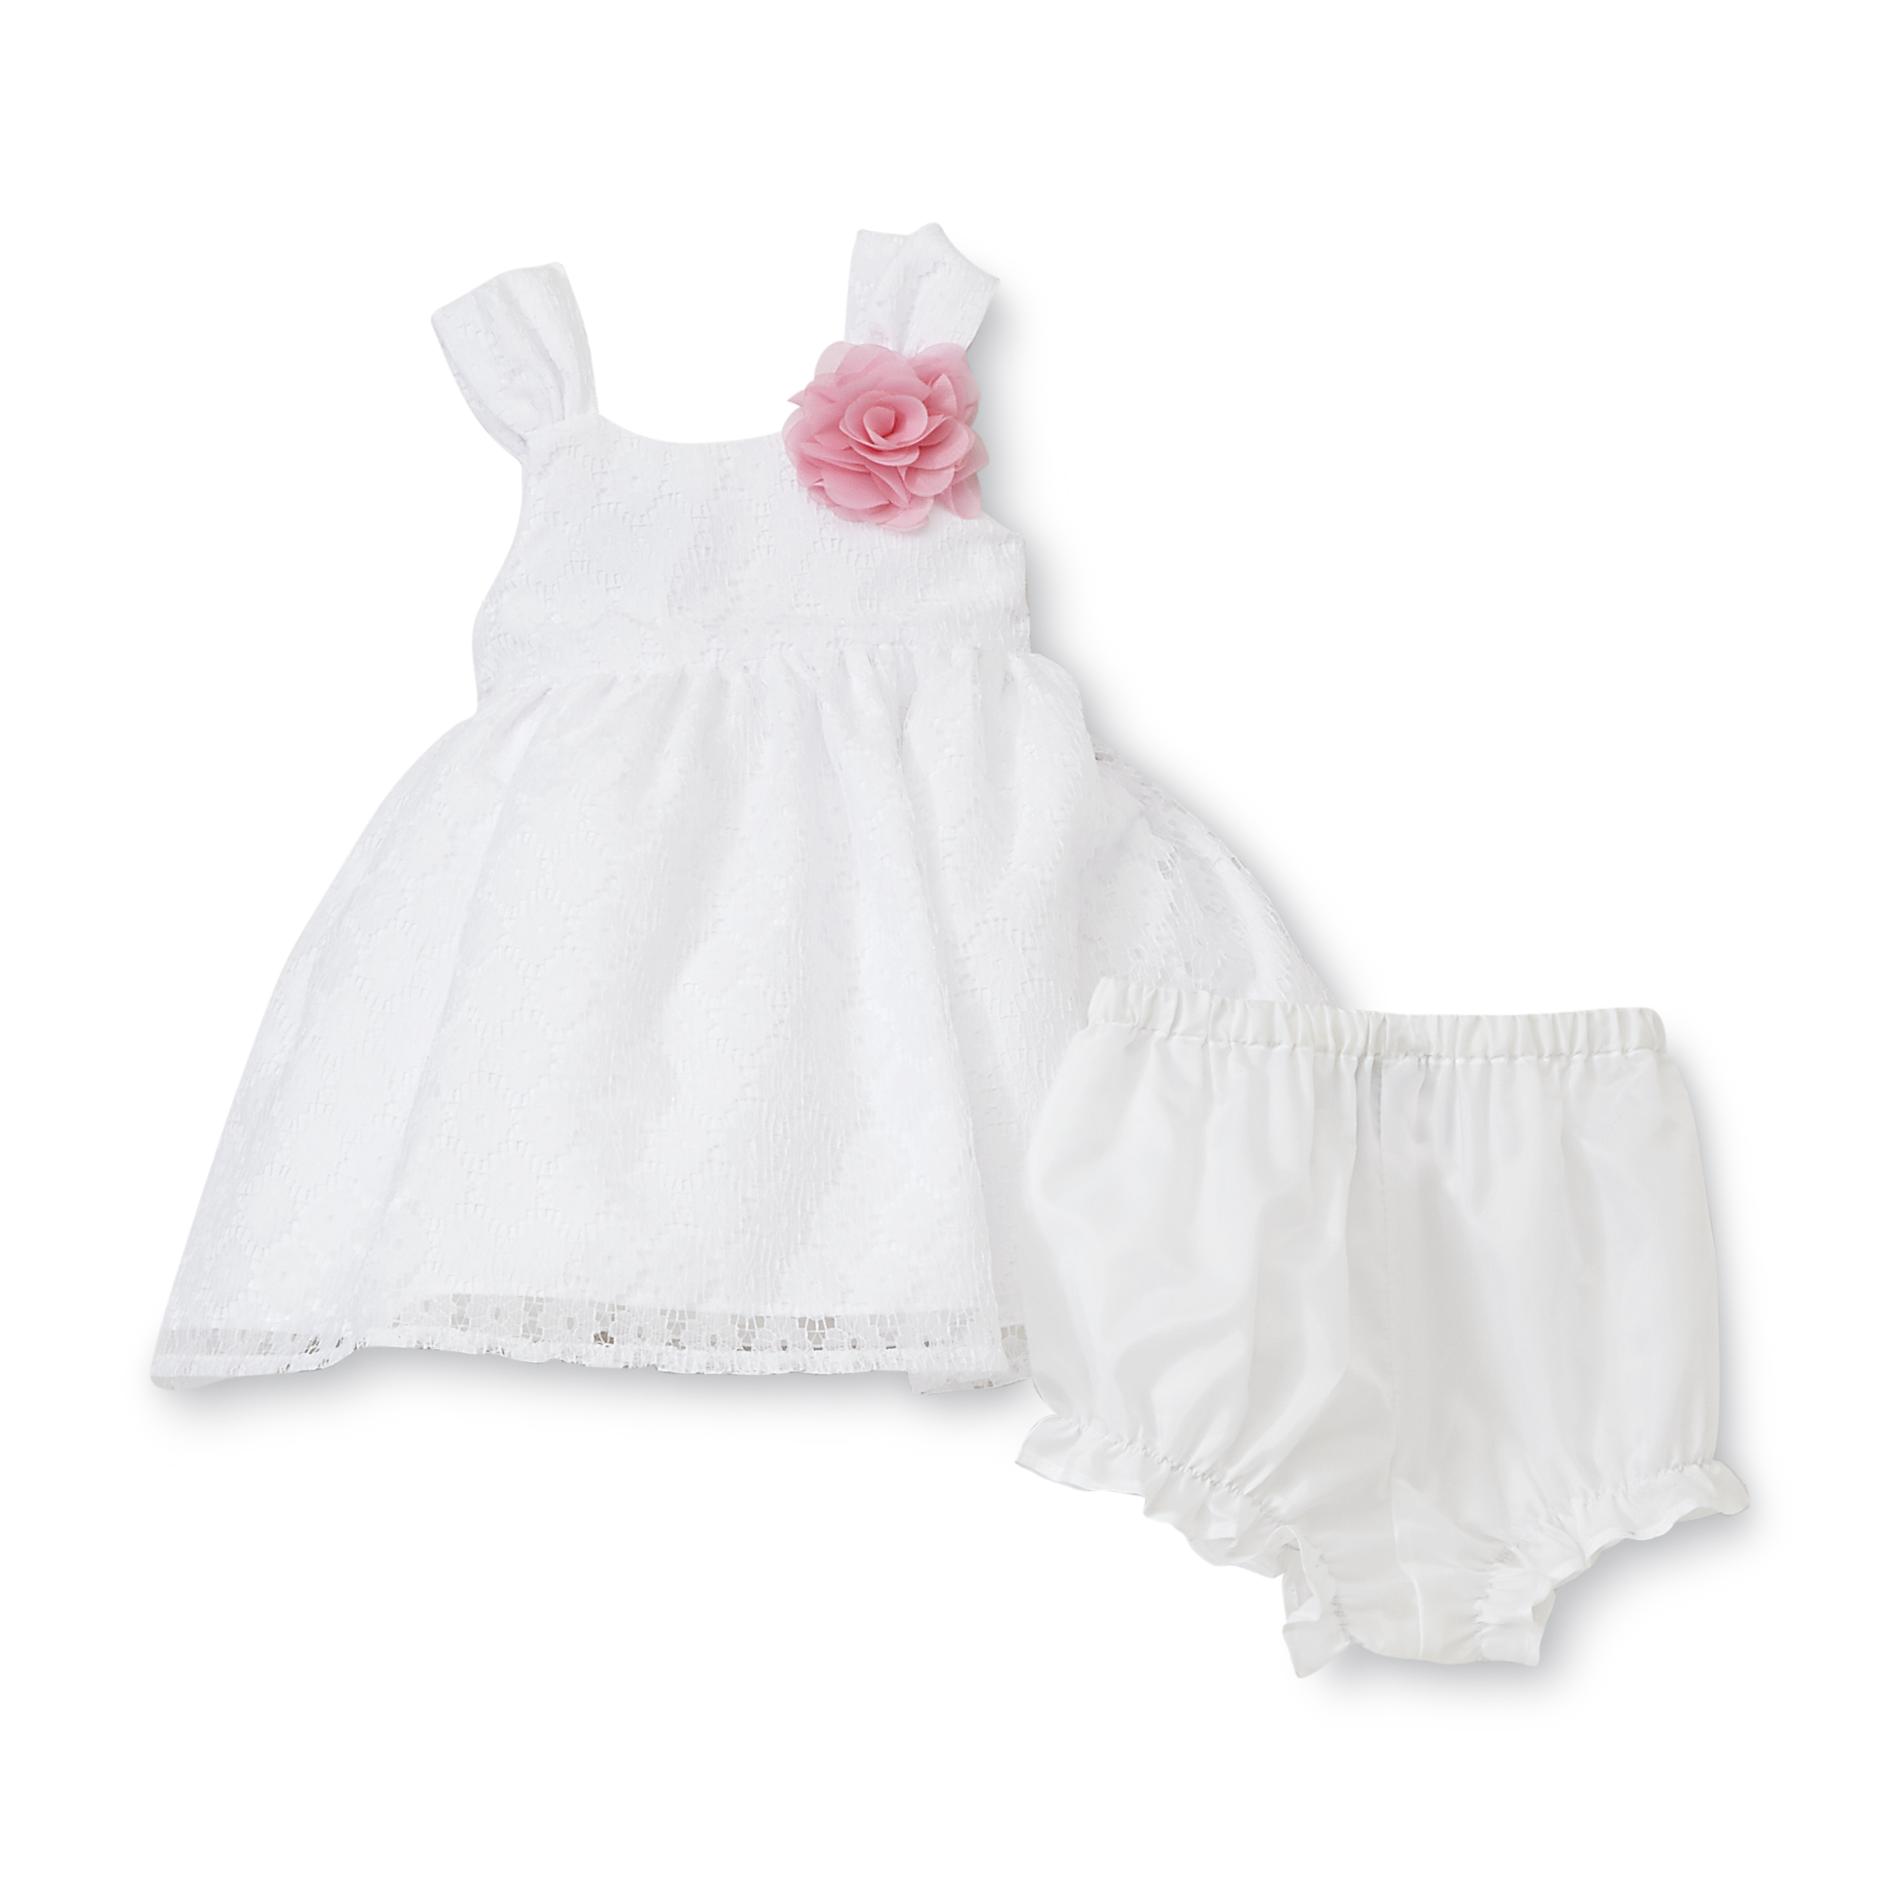 Holiday Editions Newborn Girl's Lace Dress & Diaper Cover